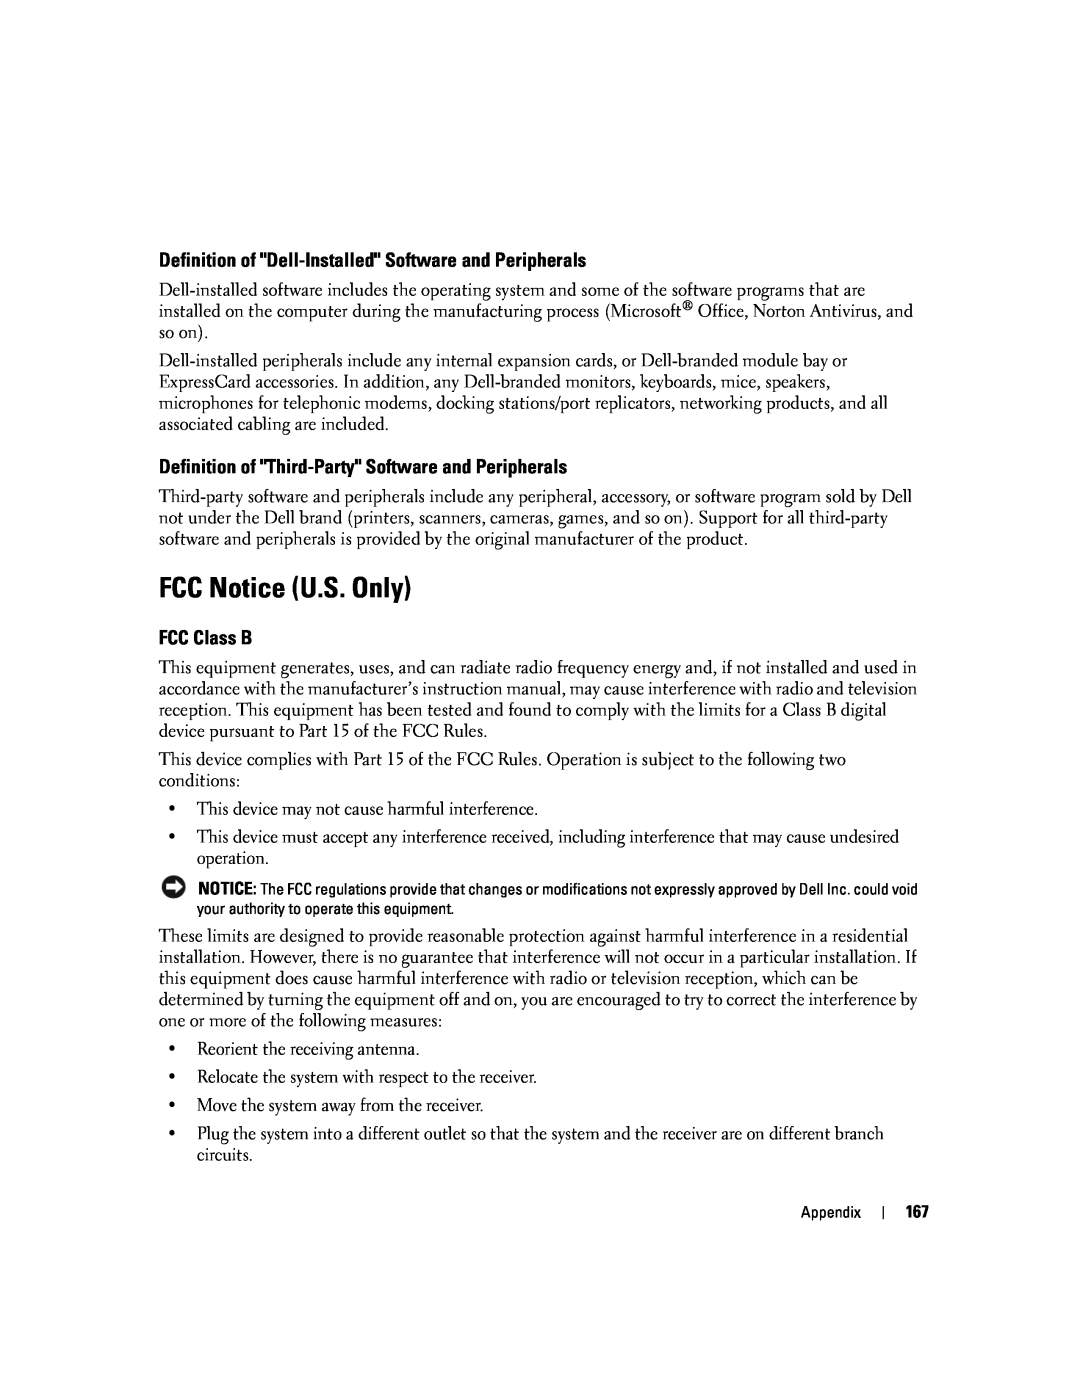 Dell PP20L owner manual FCC Notice U.S. Only, Definition of Dell-Installed Software and Peripherals, FCC Class B 